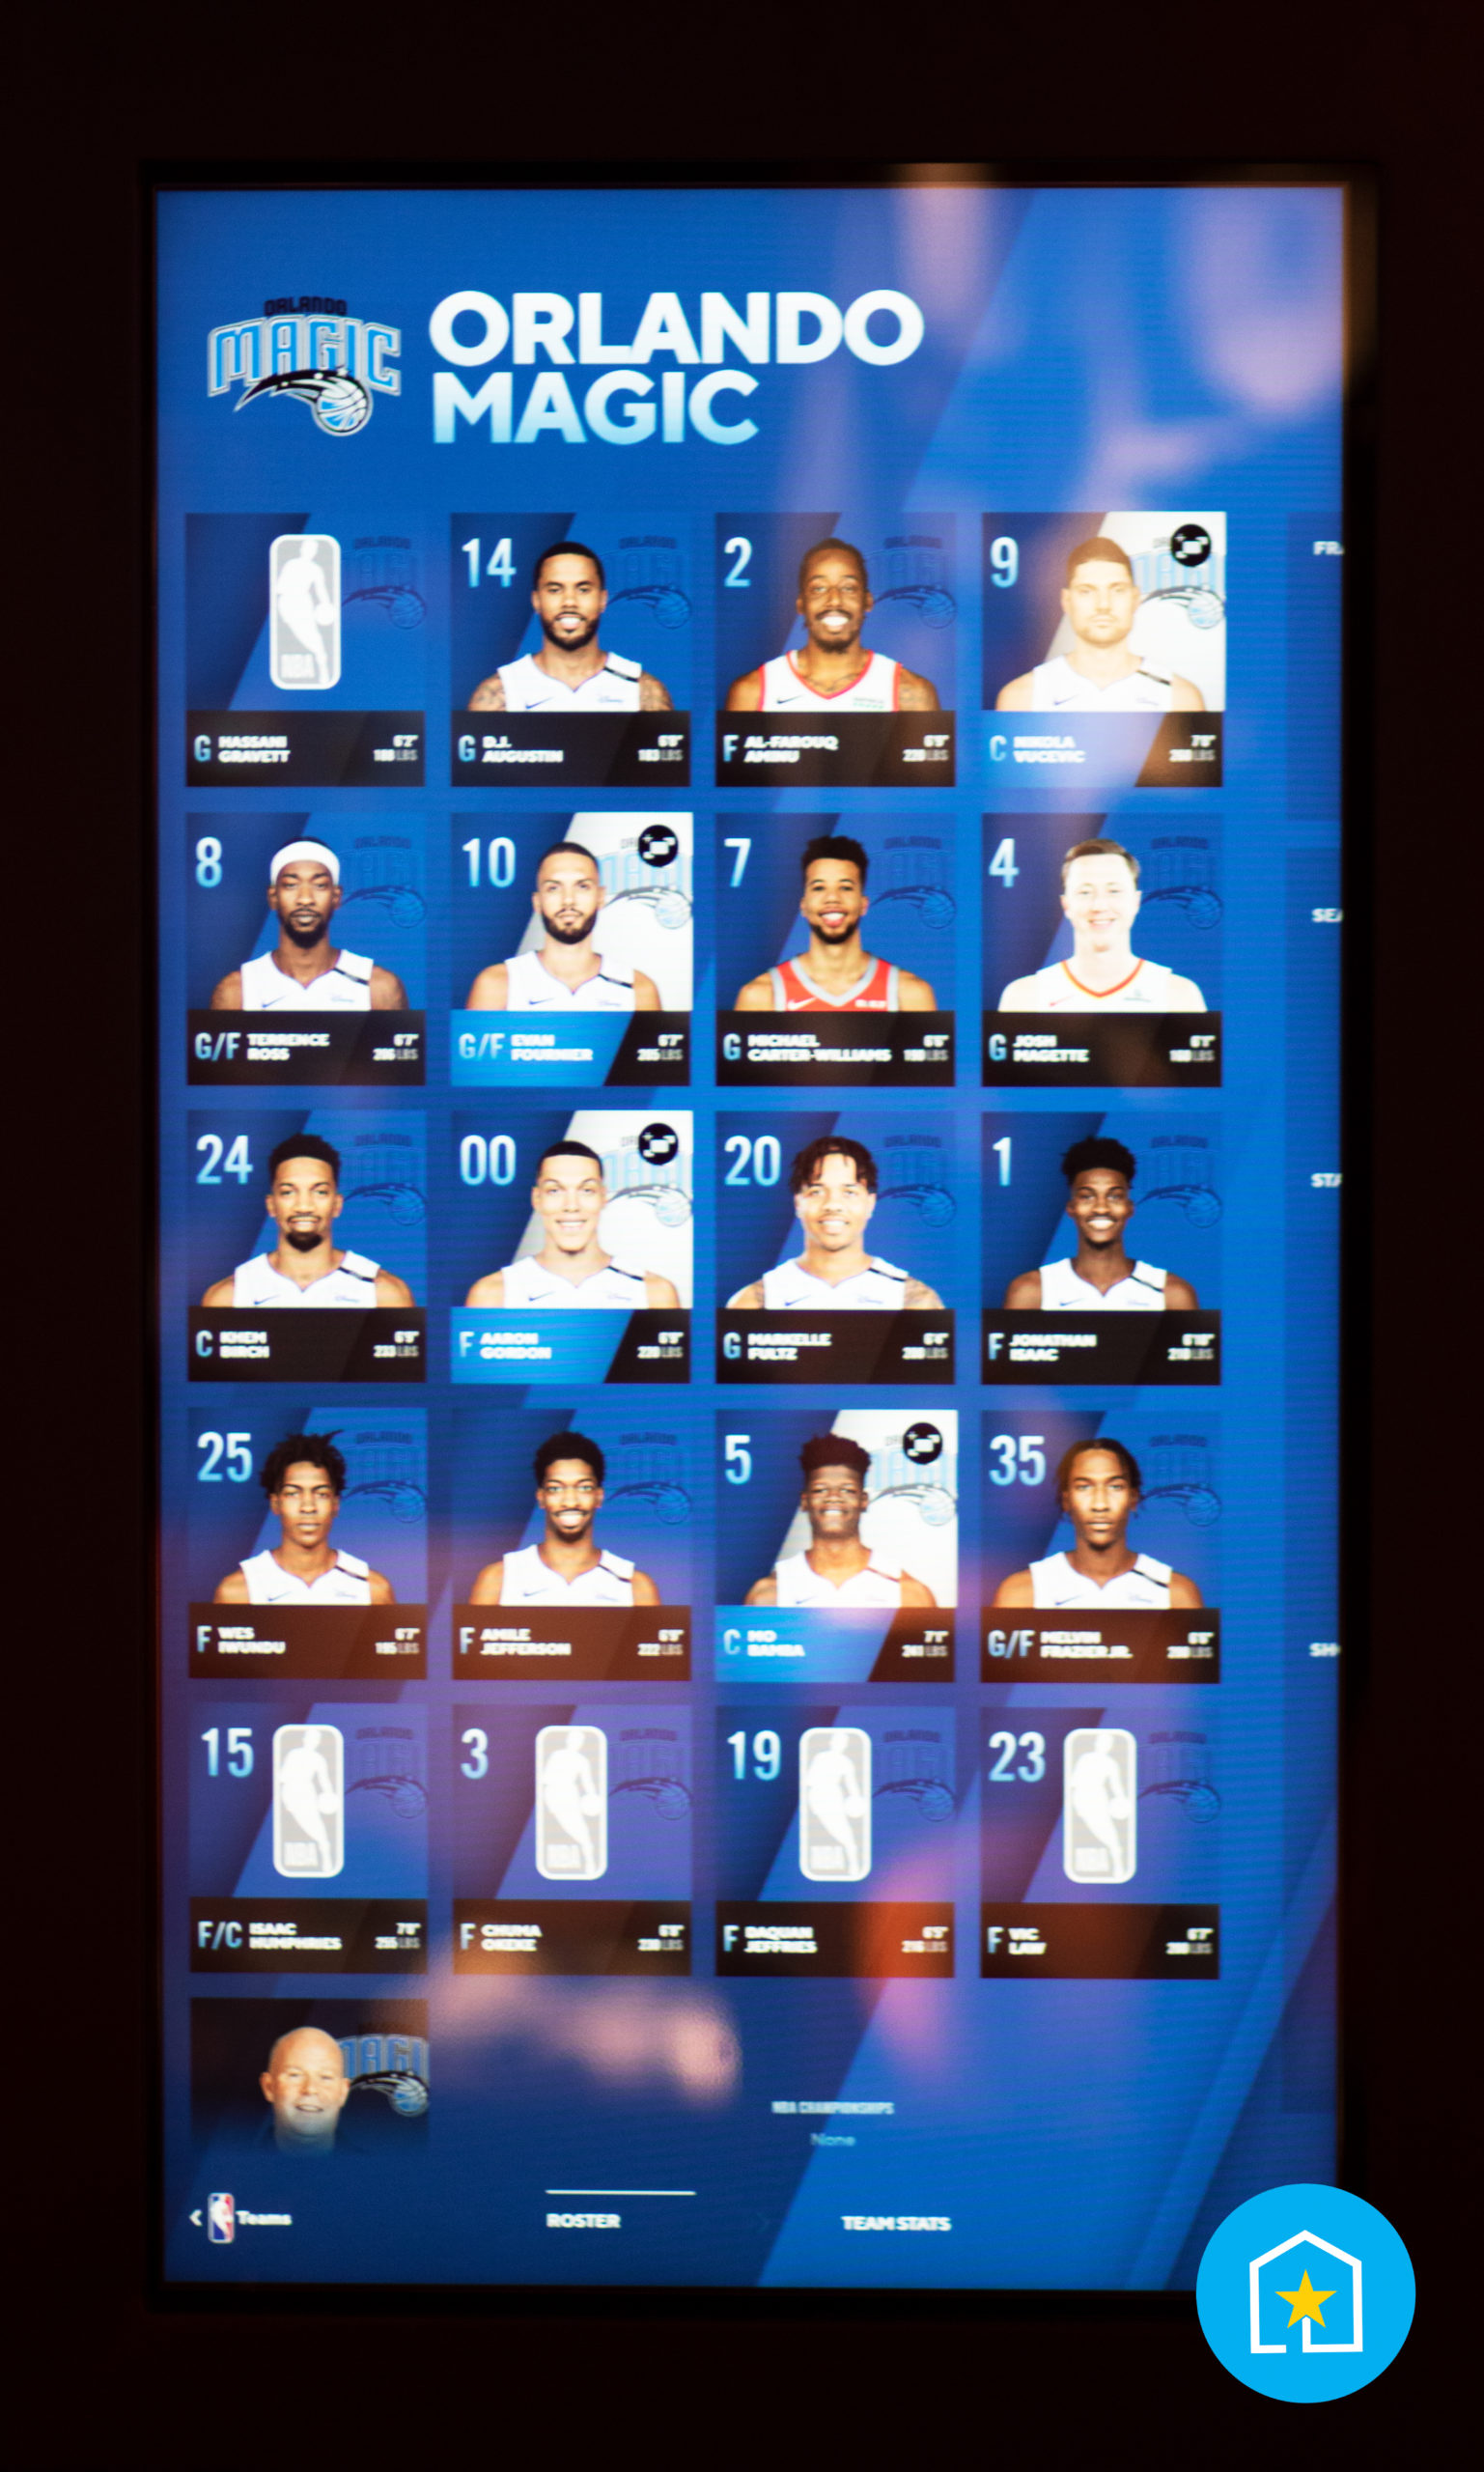 Touch screen of Orlando Magic basketball players in the Players room of NBA Experience at Disney Springs® (Lake Buena Vista, Florida).